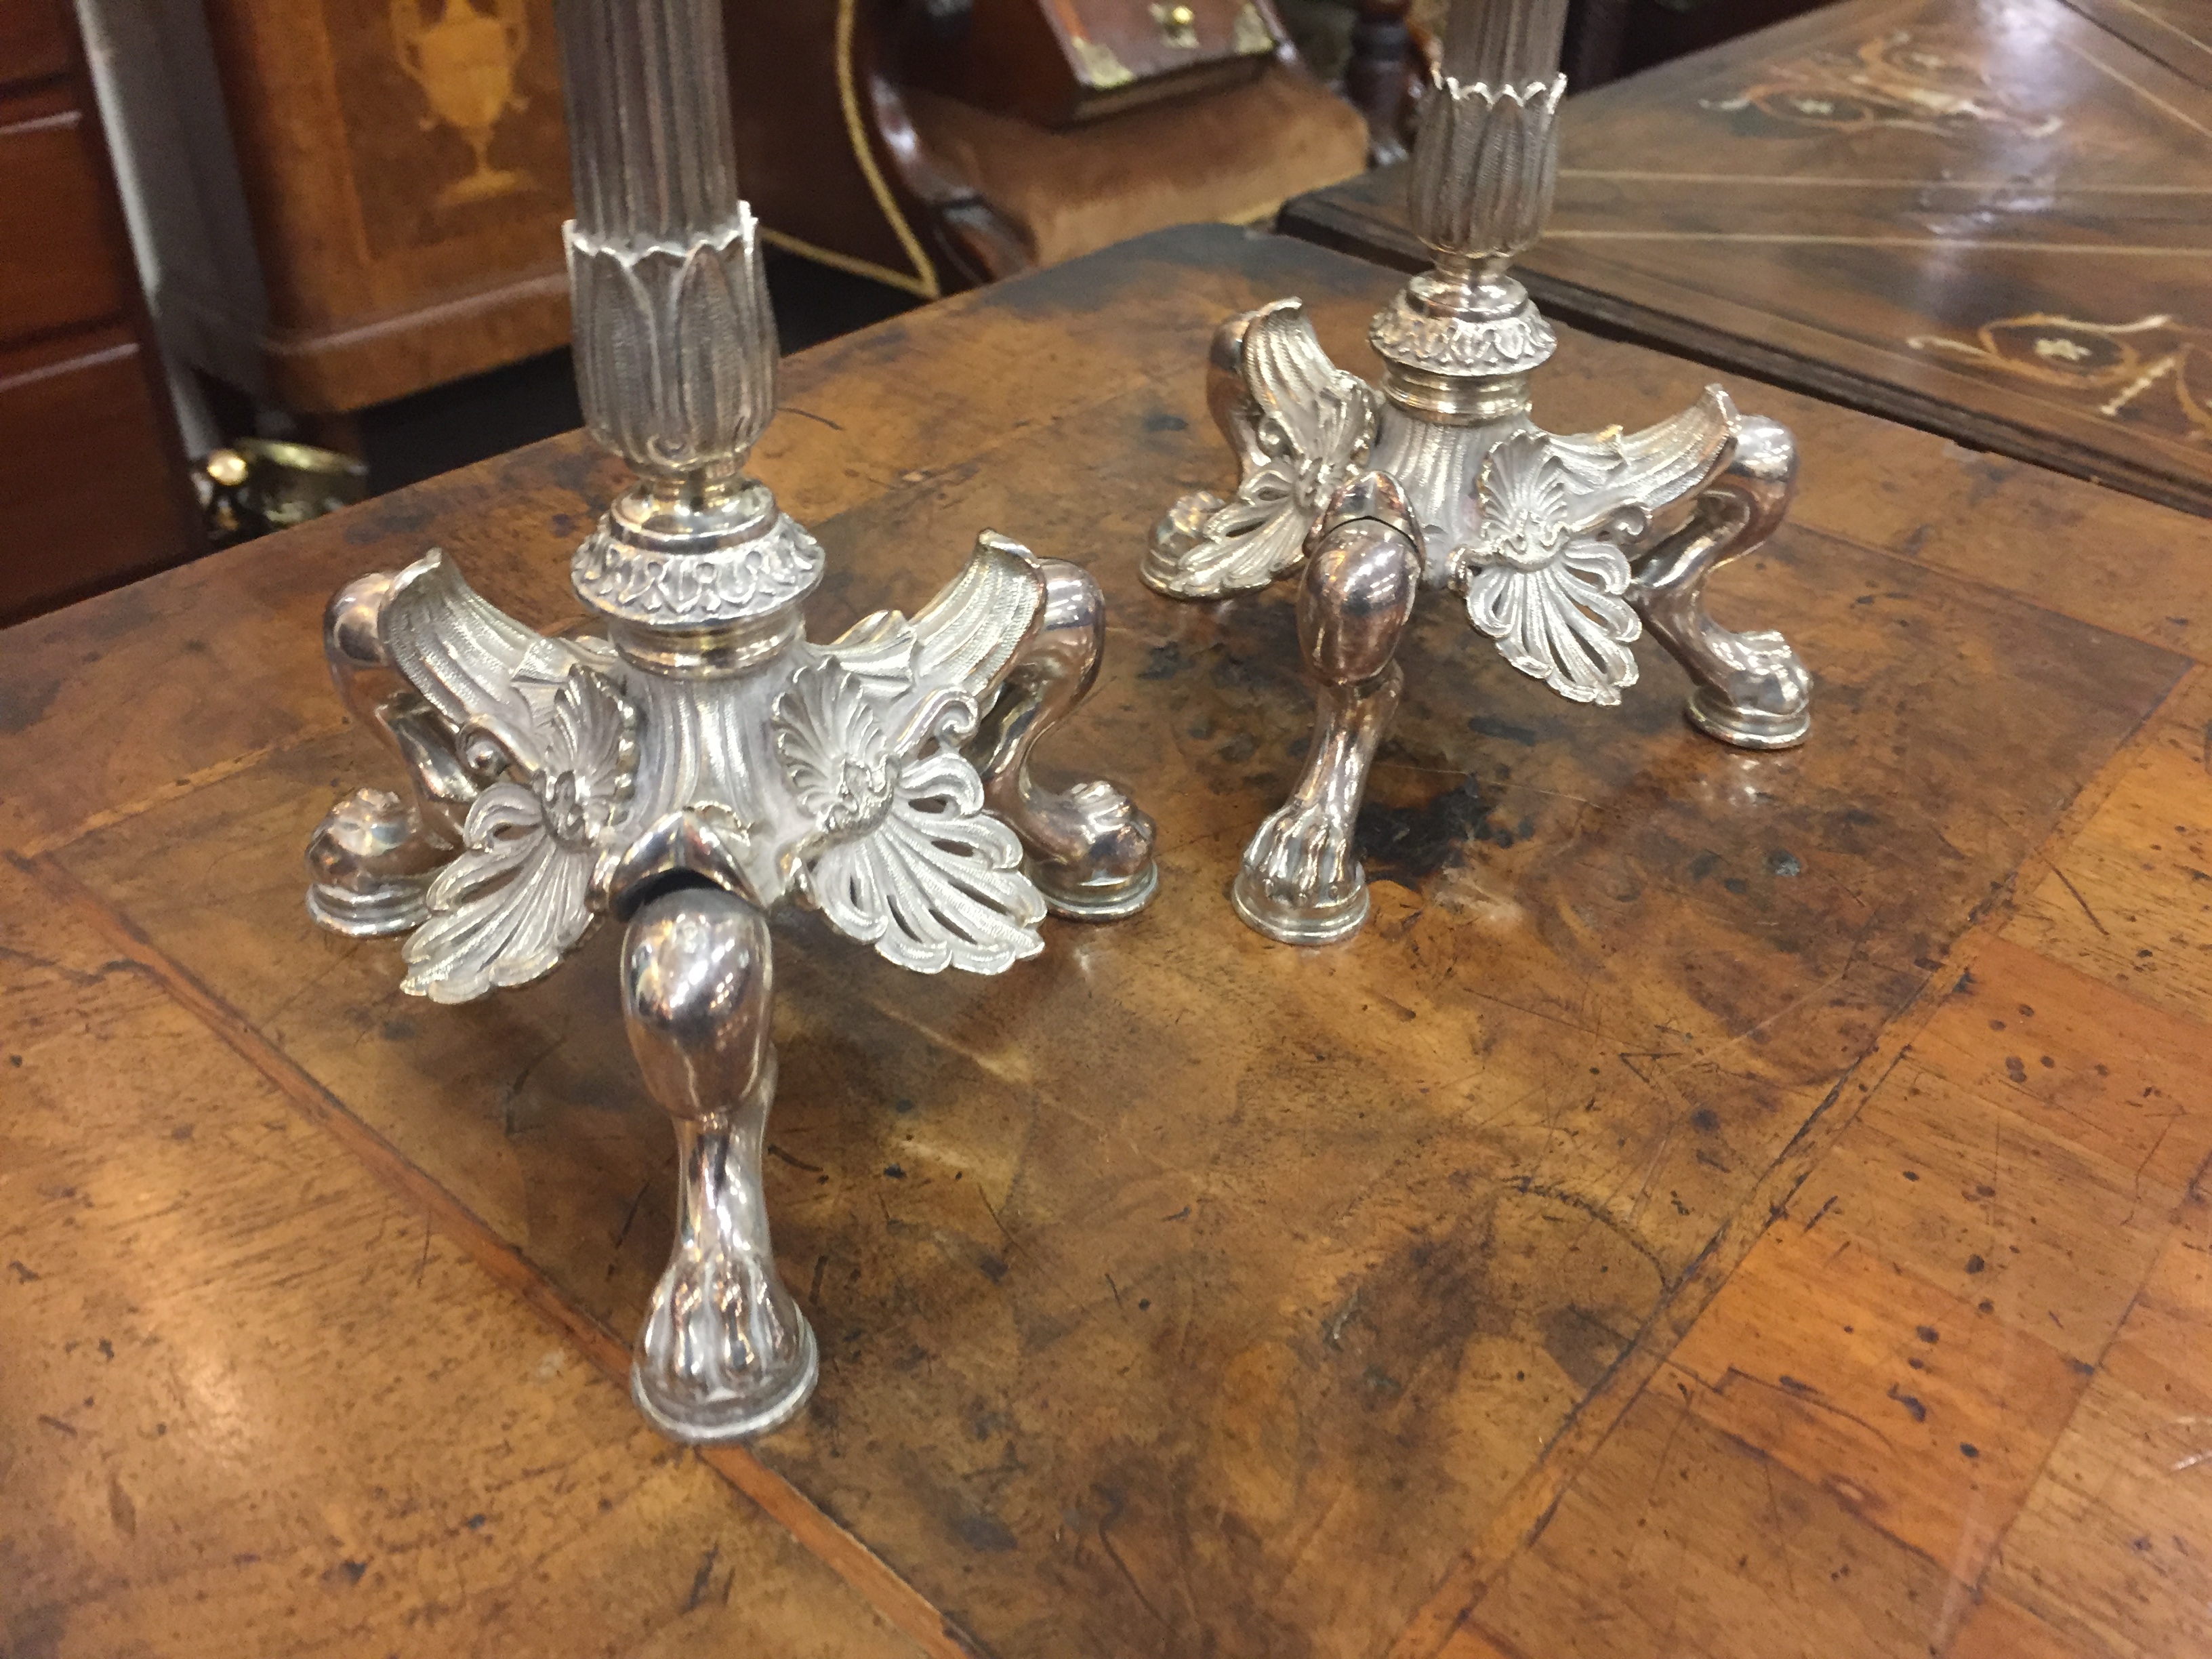 A pair of heavy Georgian style silver plated Candlesticks, by Elkington & Co. - Image 9 of 11